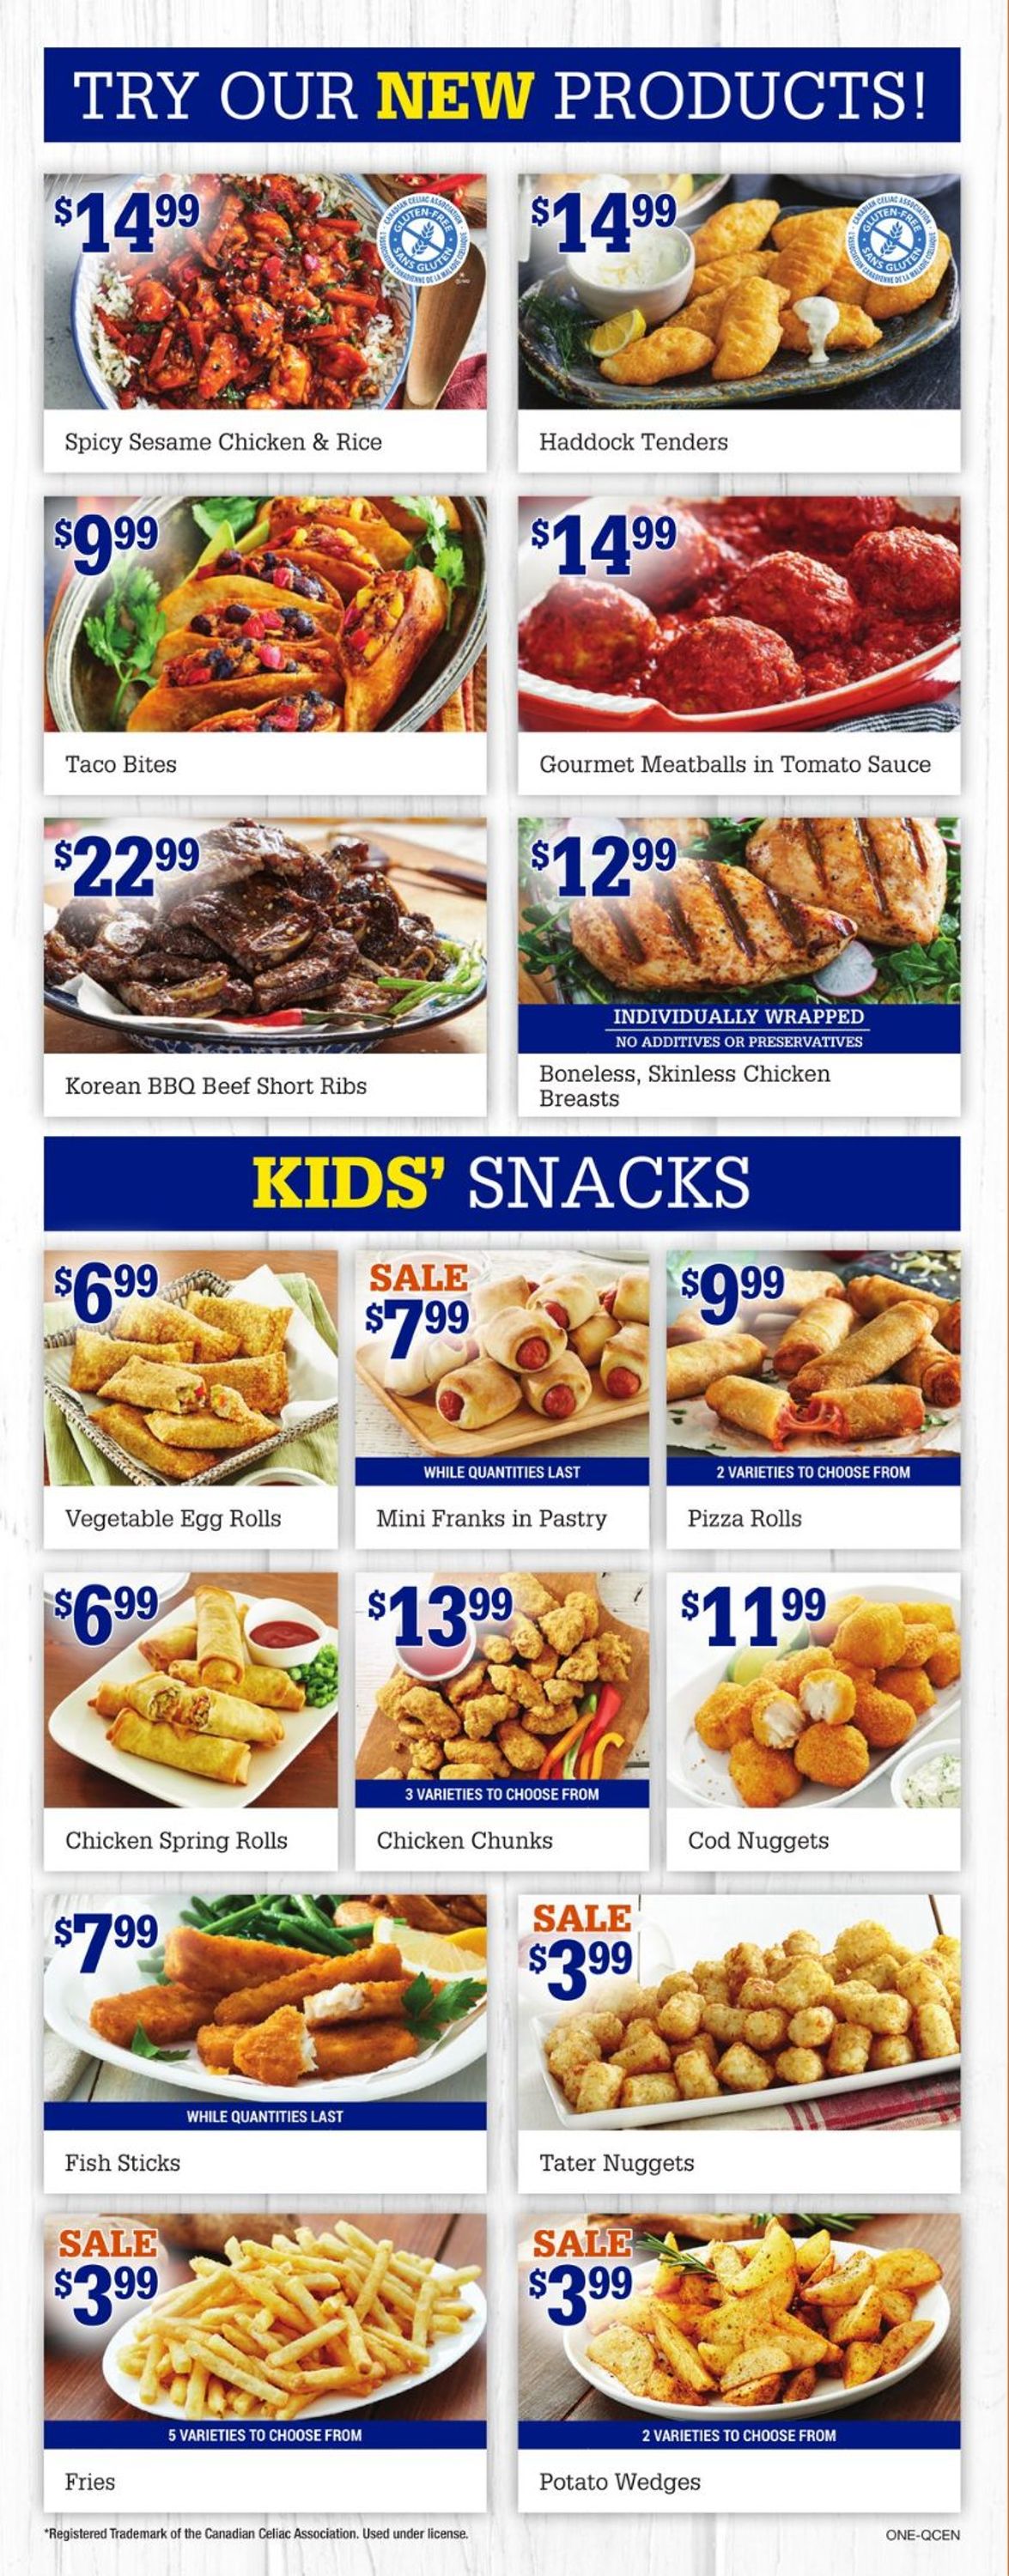 M&M Food Market Flyer from 10/15/2020